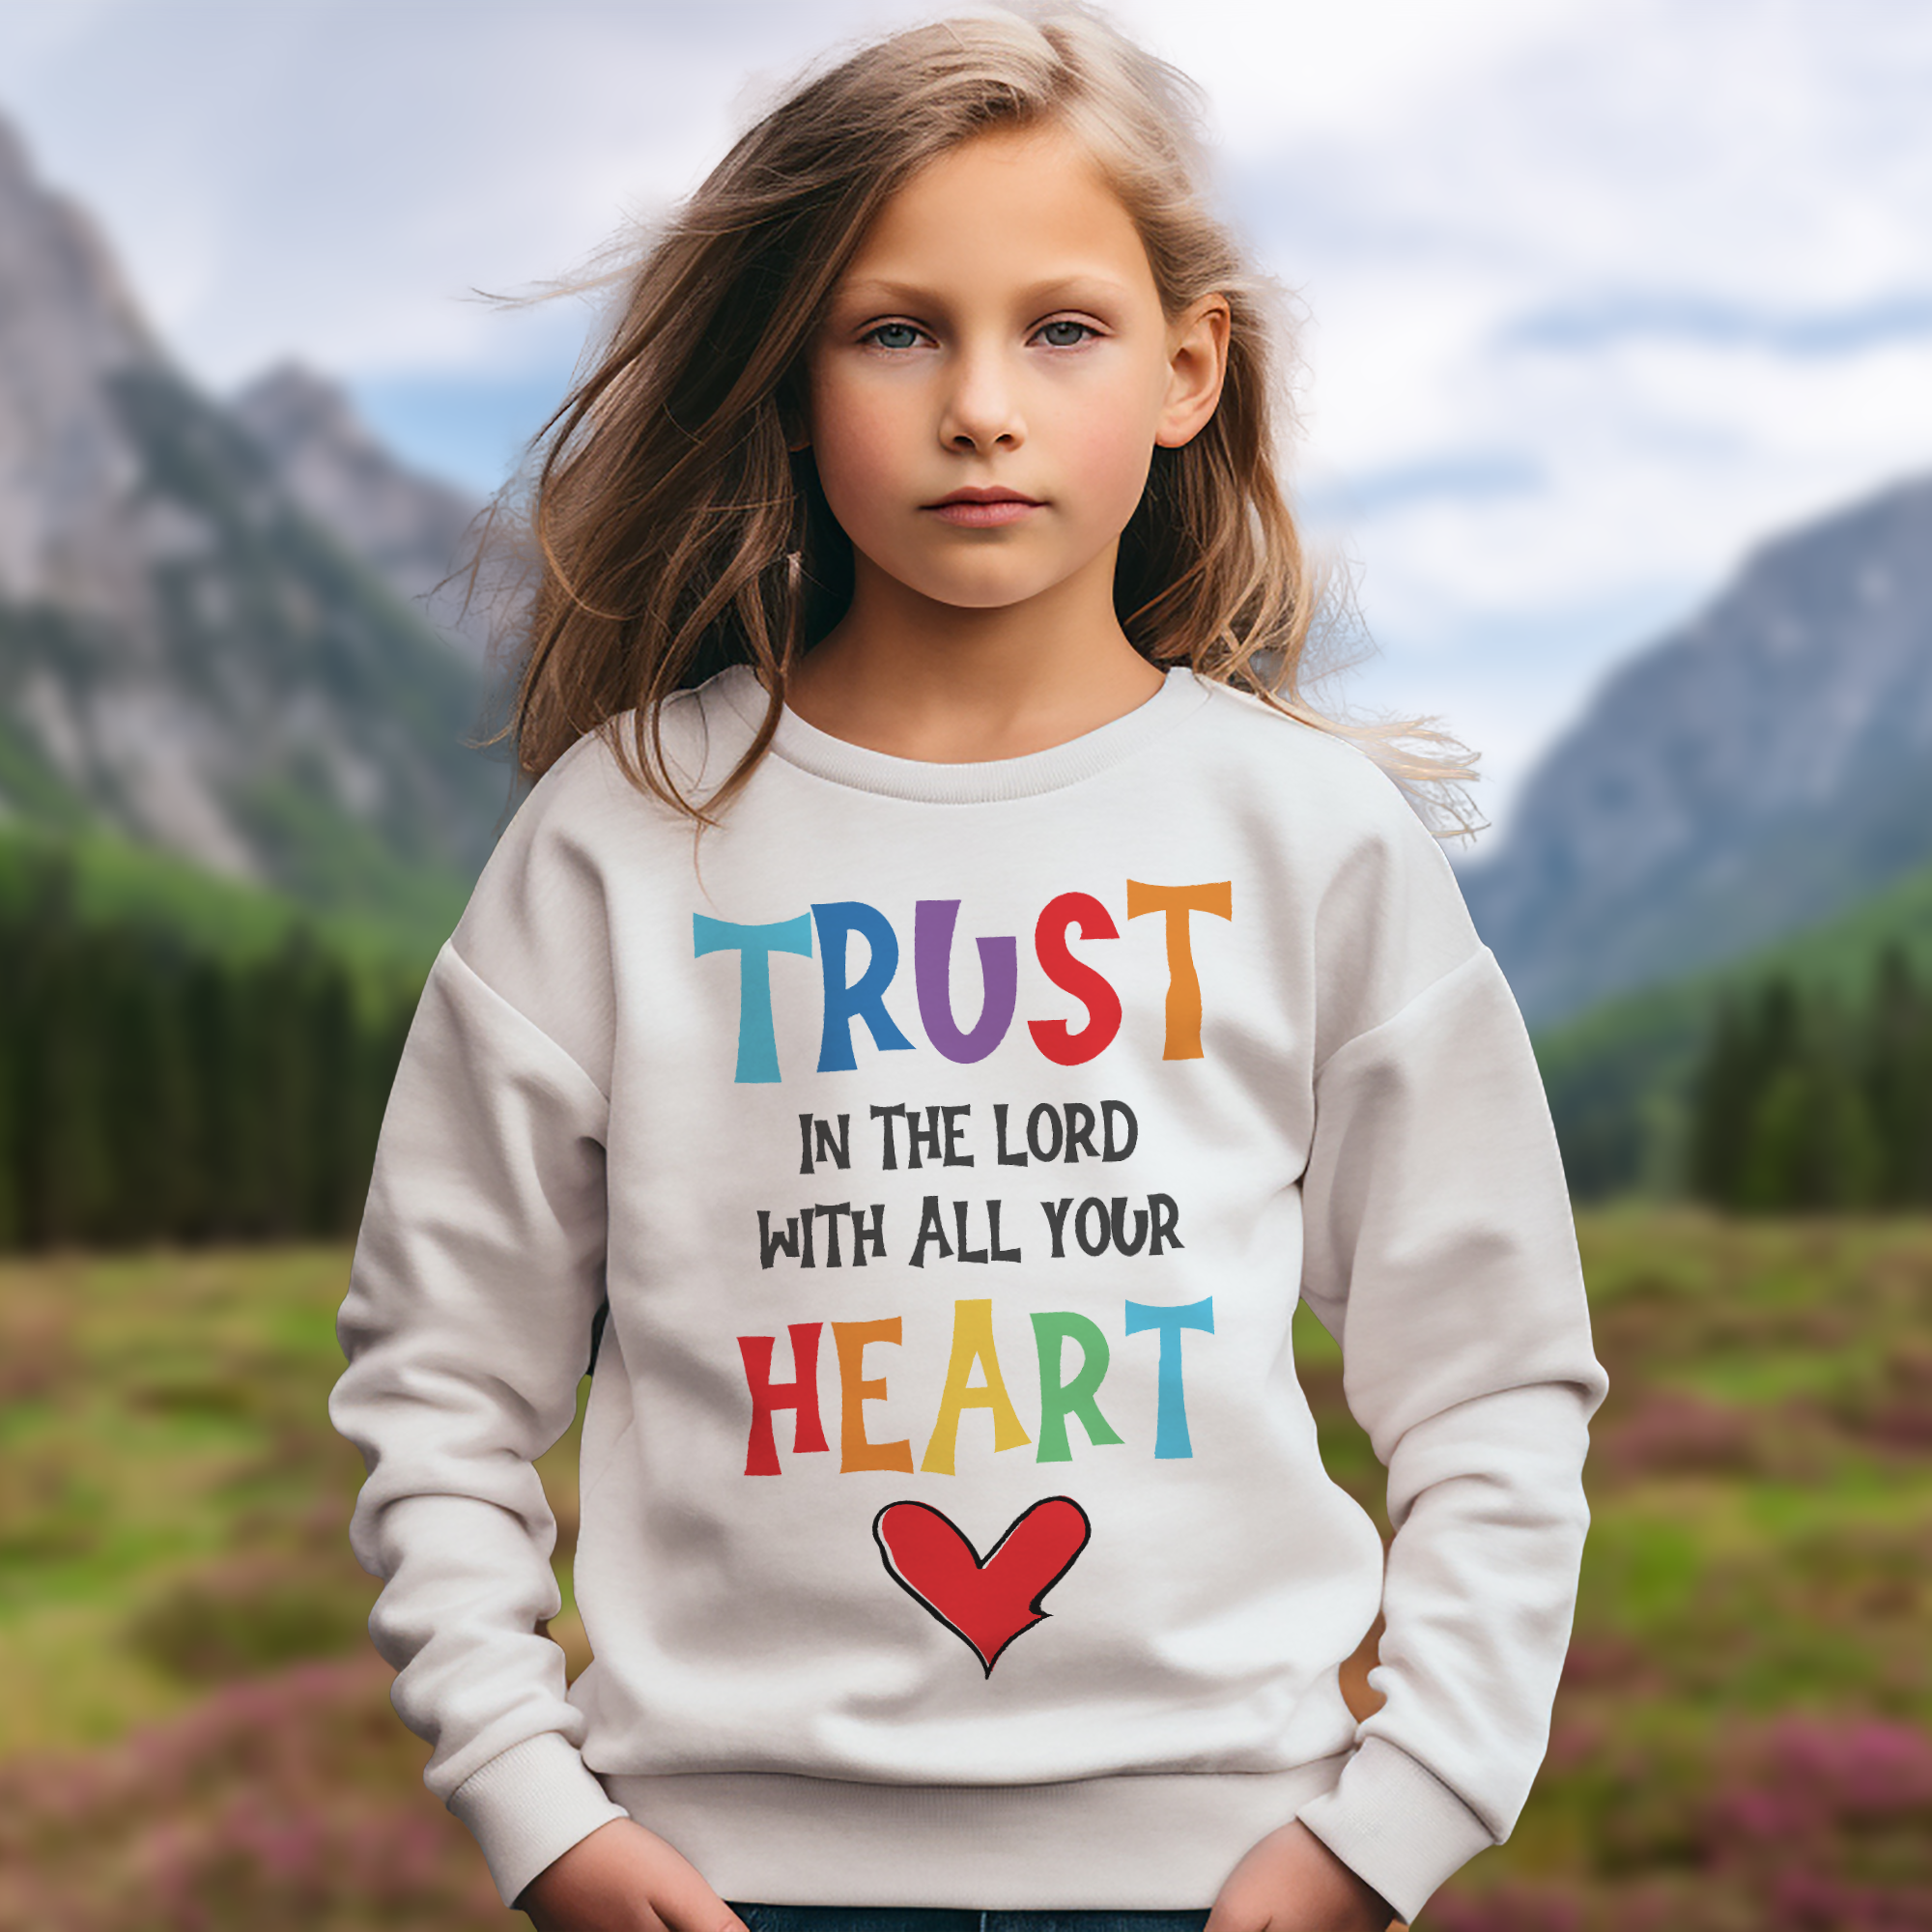 Trust in the Lord Youth Crewneck Sweatshirt Color: White Size: XS Jesus Passion Apparel